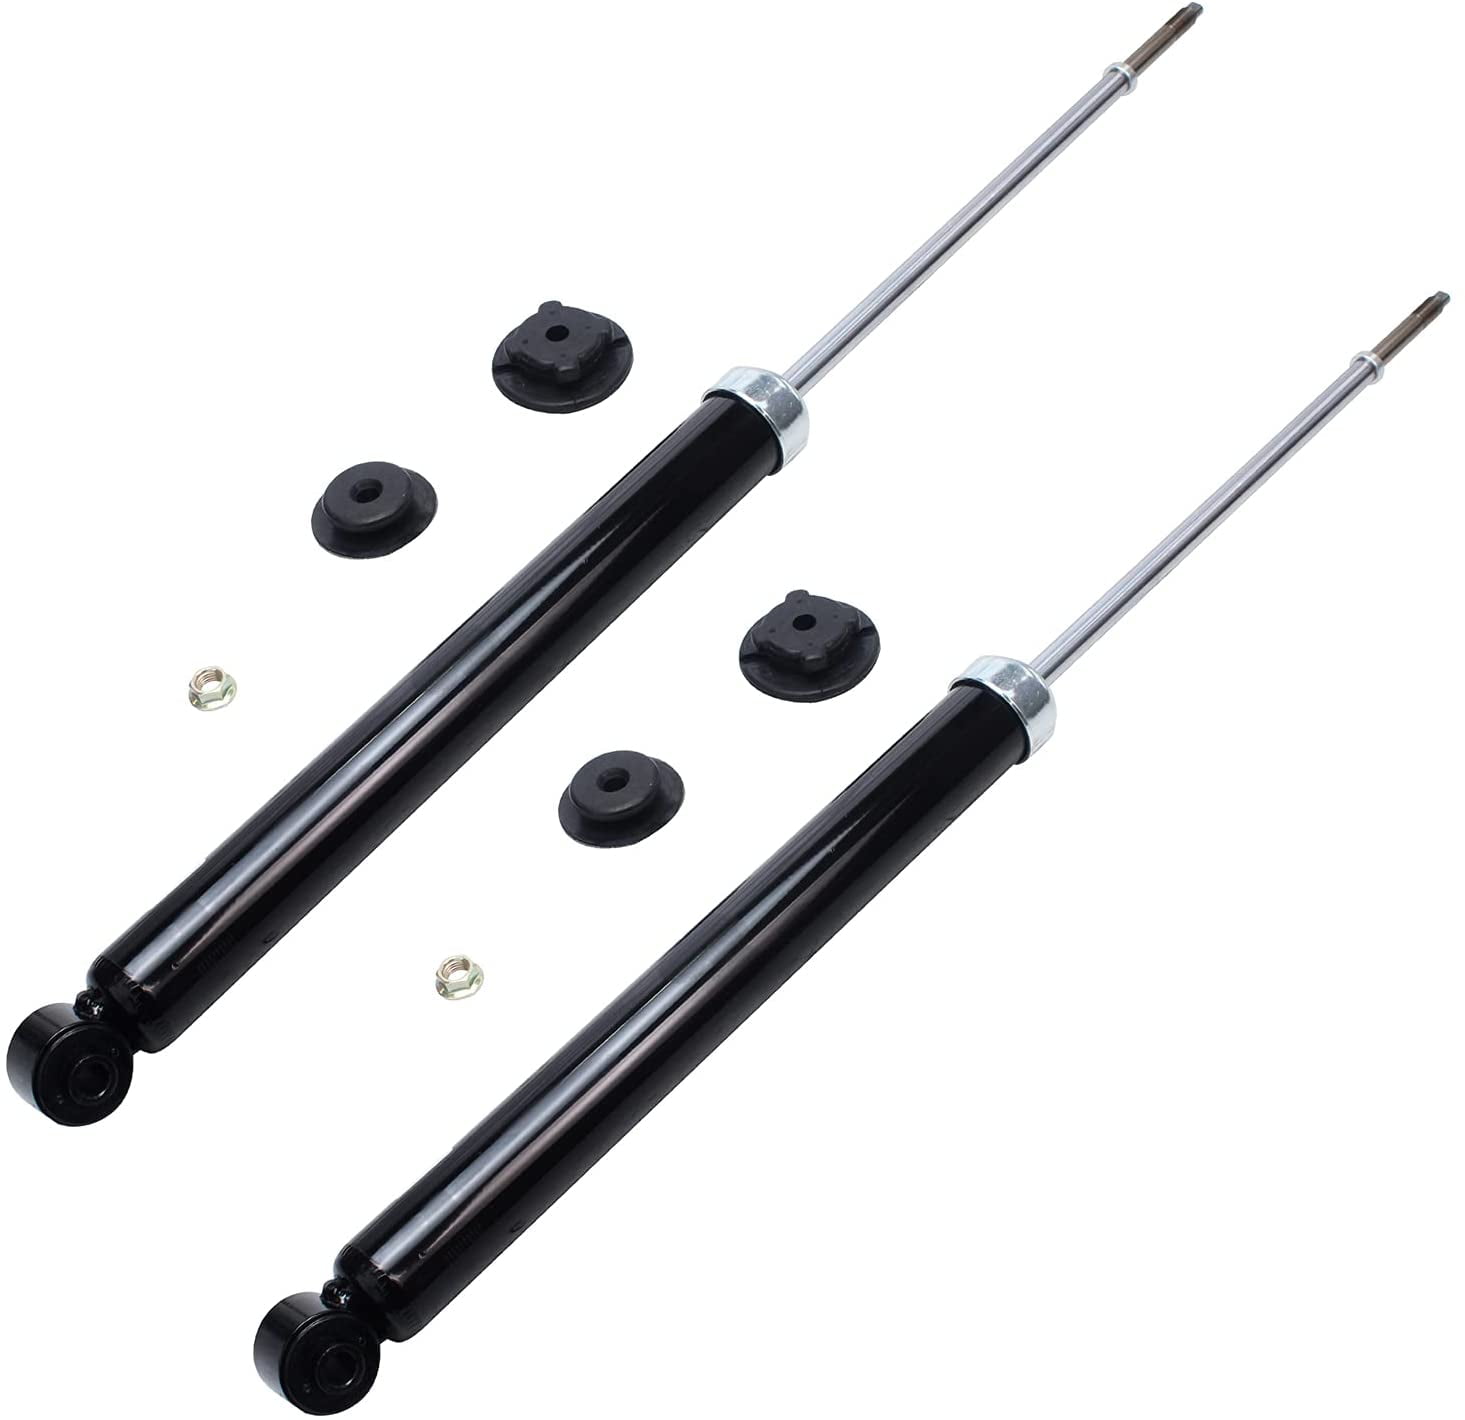 Pair Set of 2 Front Bilstein B6 Shock Absorbers For Buick Century Regal Seville 